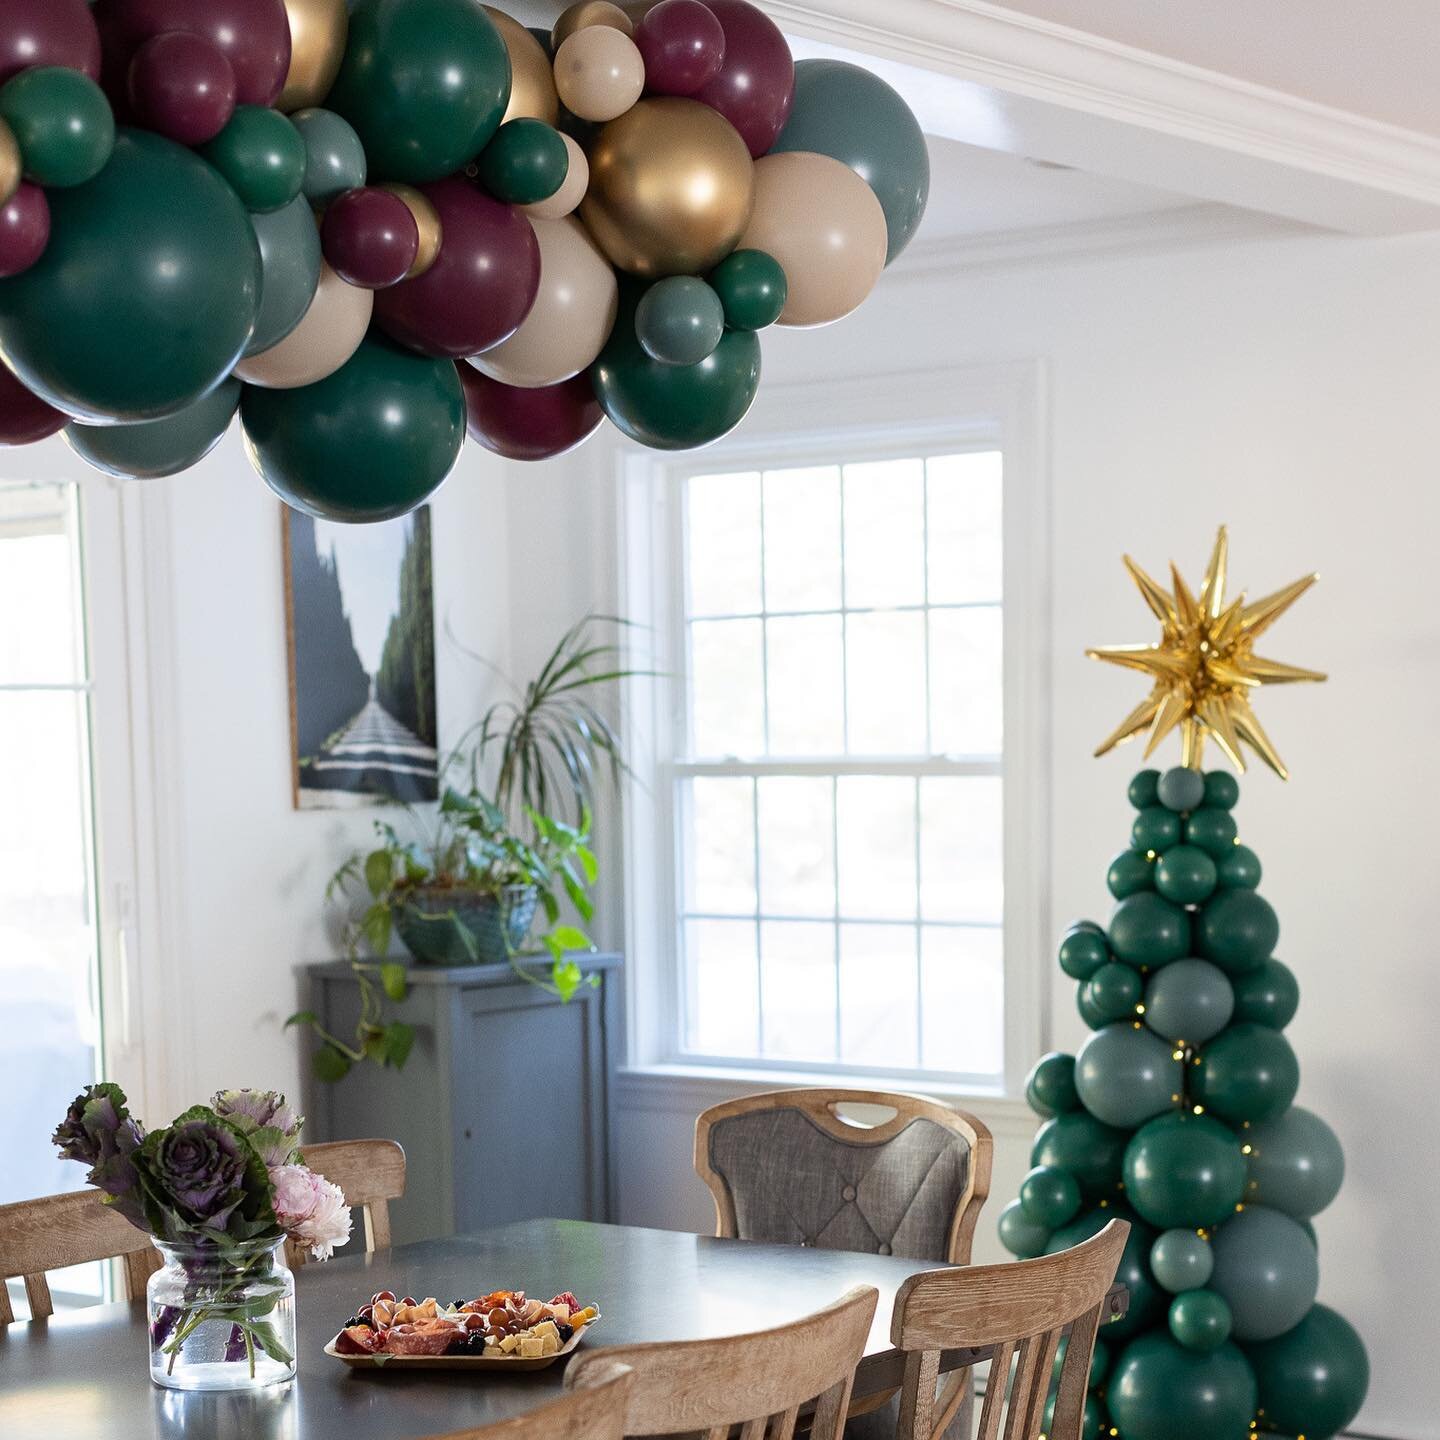 Time to order your holiday Grab&amp;Go garlands and Balloon Christmas trees 🎄🎈&thinsp;&thinsp;
Completely customizable and can be make in colors of your choice. &thinsp;&thinsp;
Grab and go garlands make it super easy when it comes to decorating fo